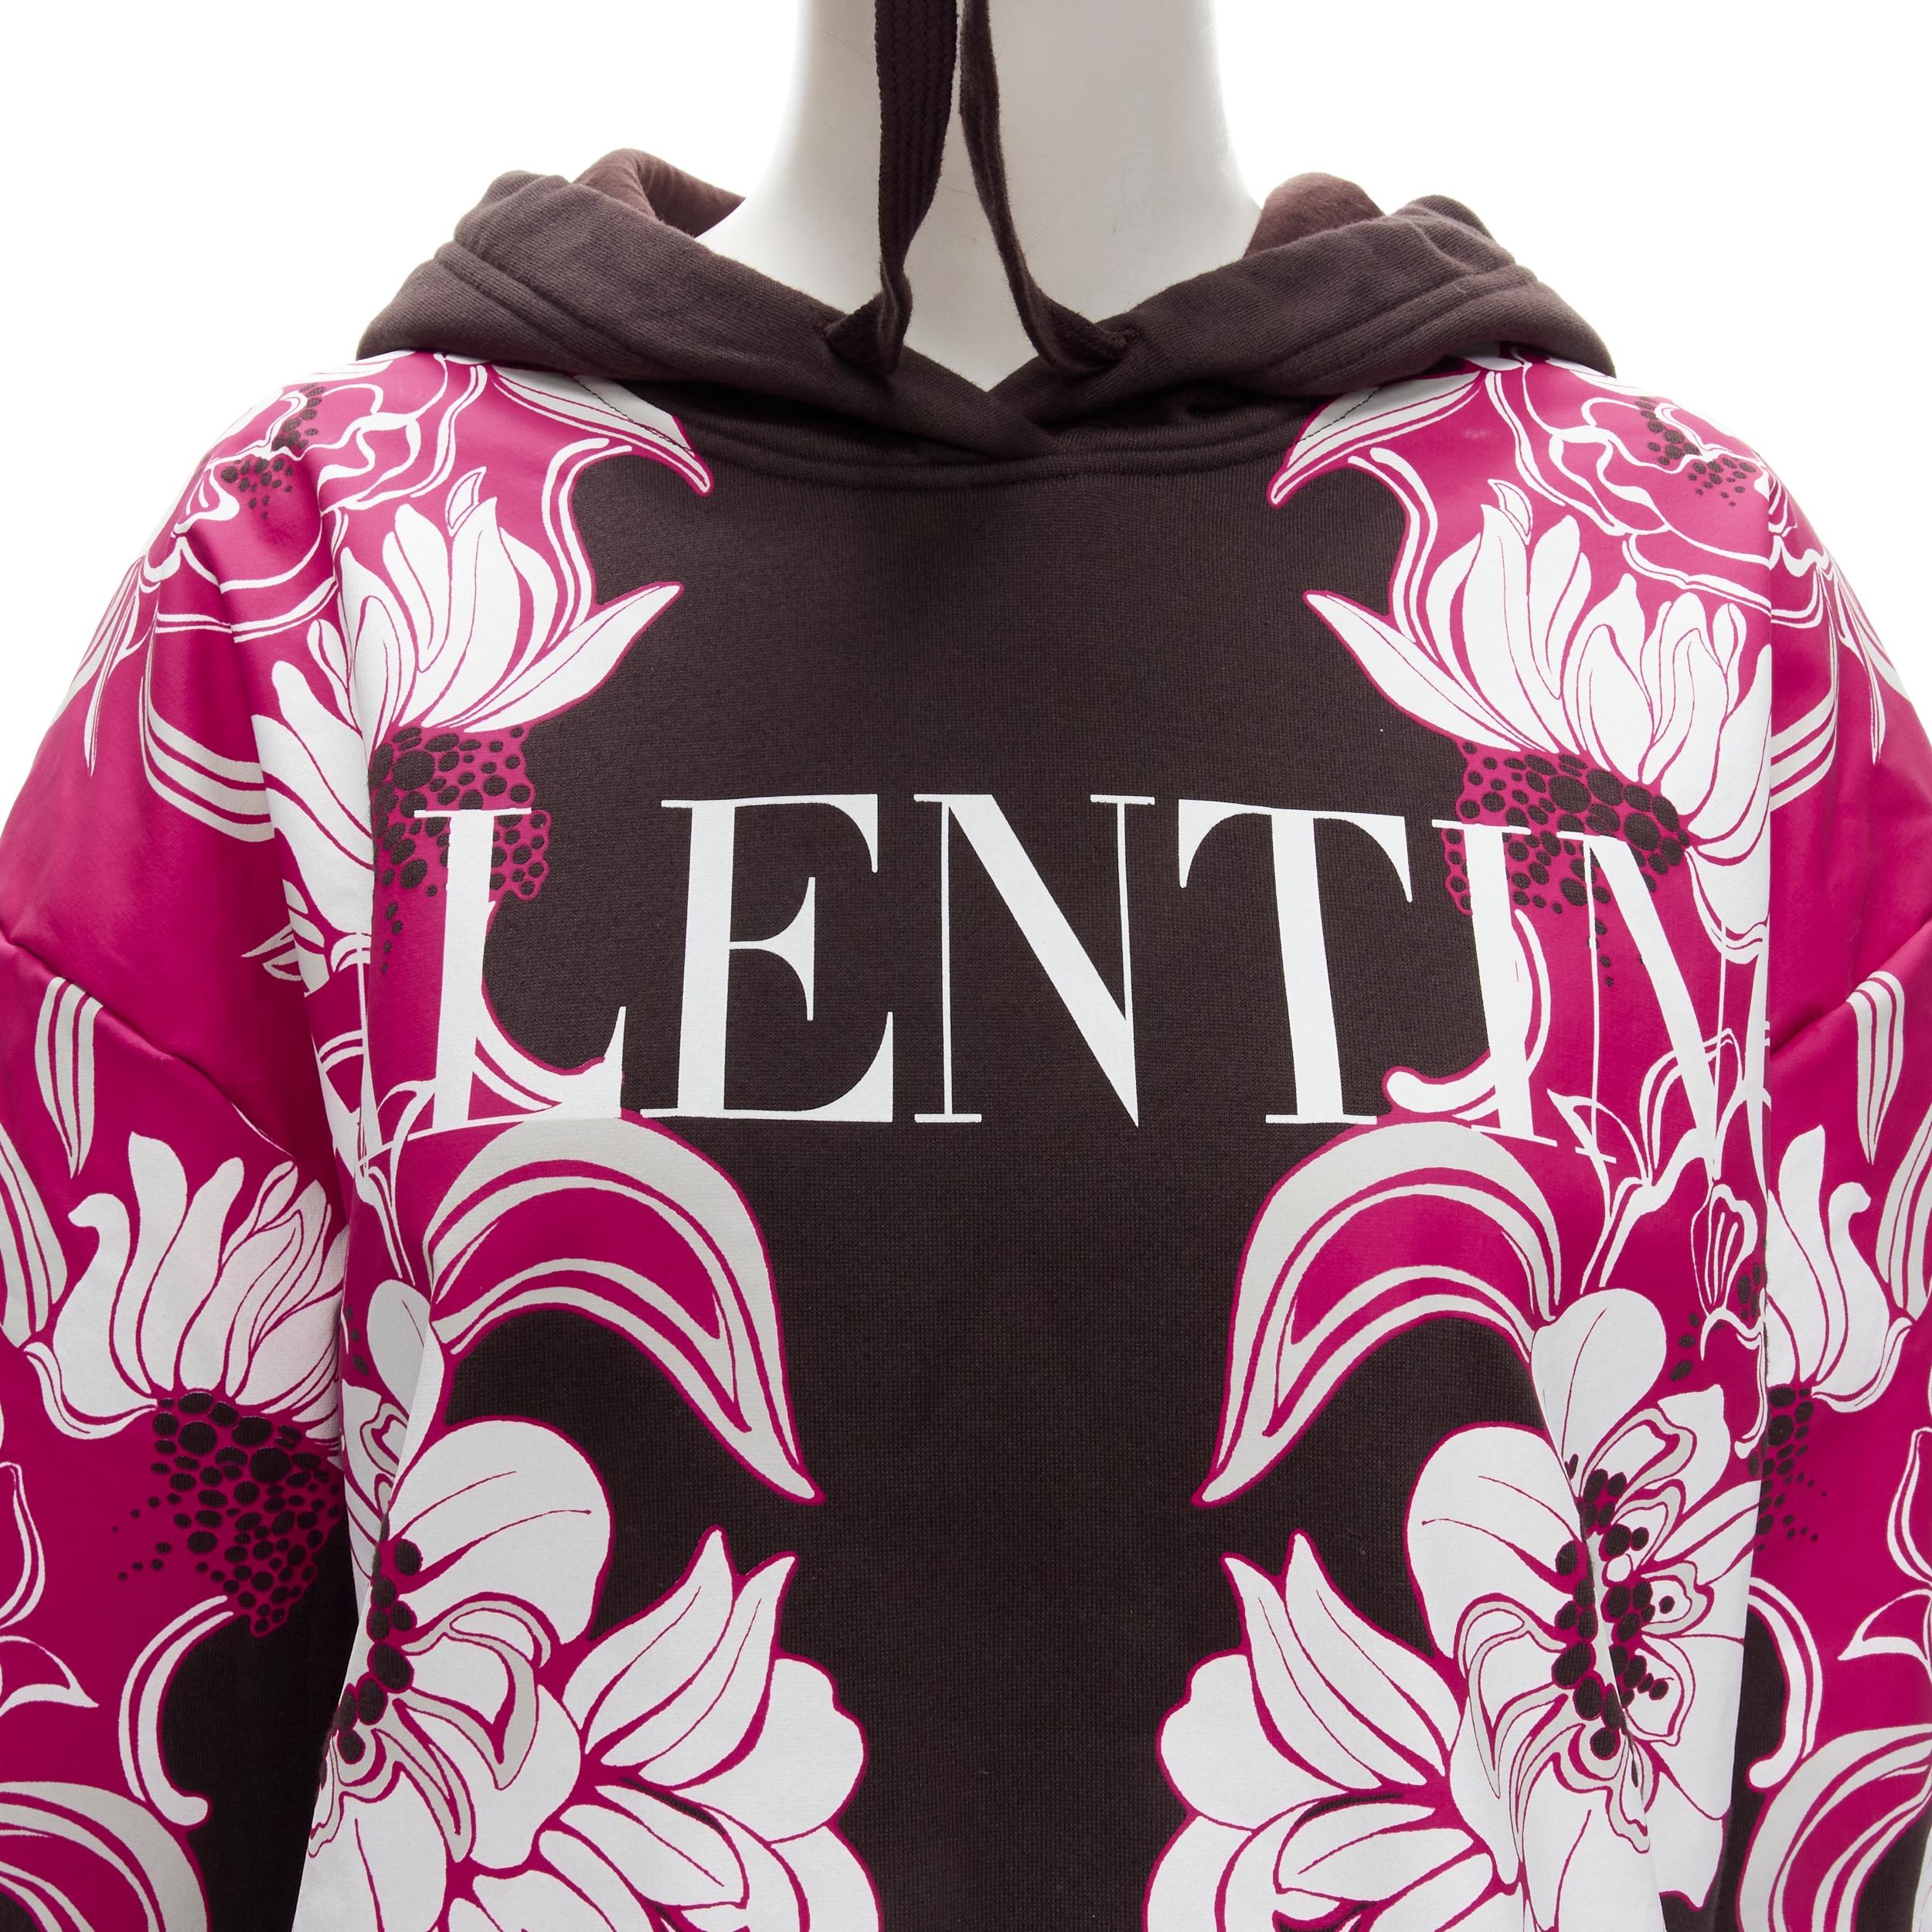 VALENTINO 2022 brown pink floral logo print cotton oversized hoodie S
Brand: Valentino
Collection: 2022 
Material: Cotton
Color: Brown
Pattern: Floral
Closure: Drawstring
Made in: Italy

CONDITION:
Condition: Excellent, this item was pre-owned and